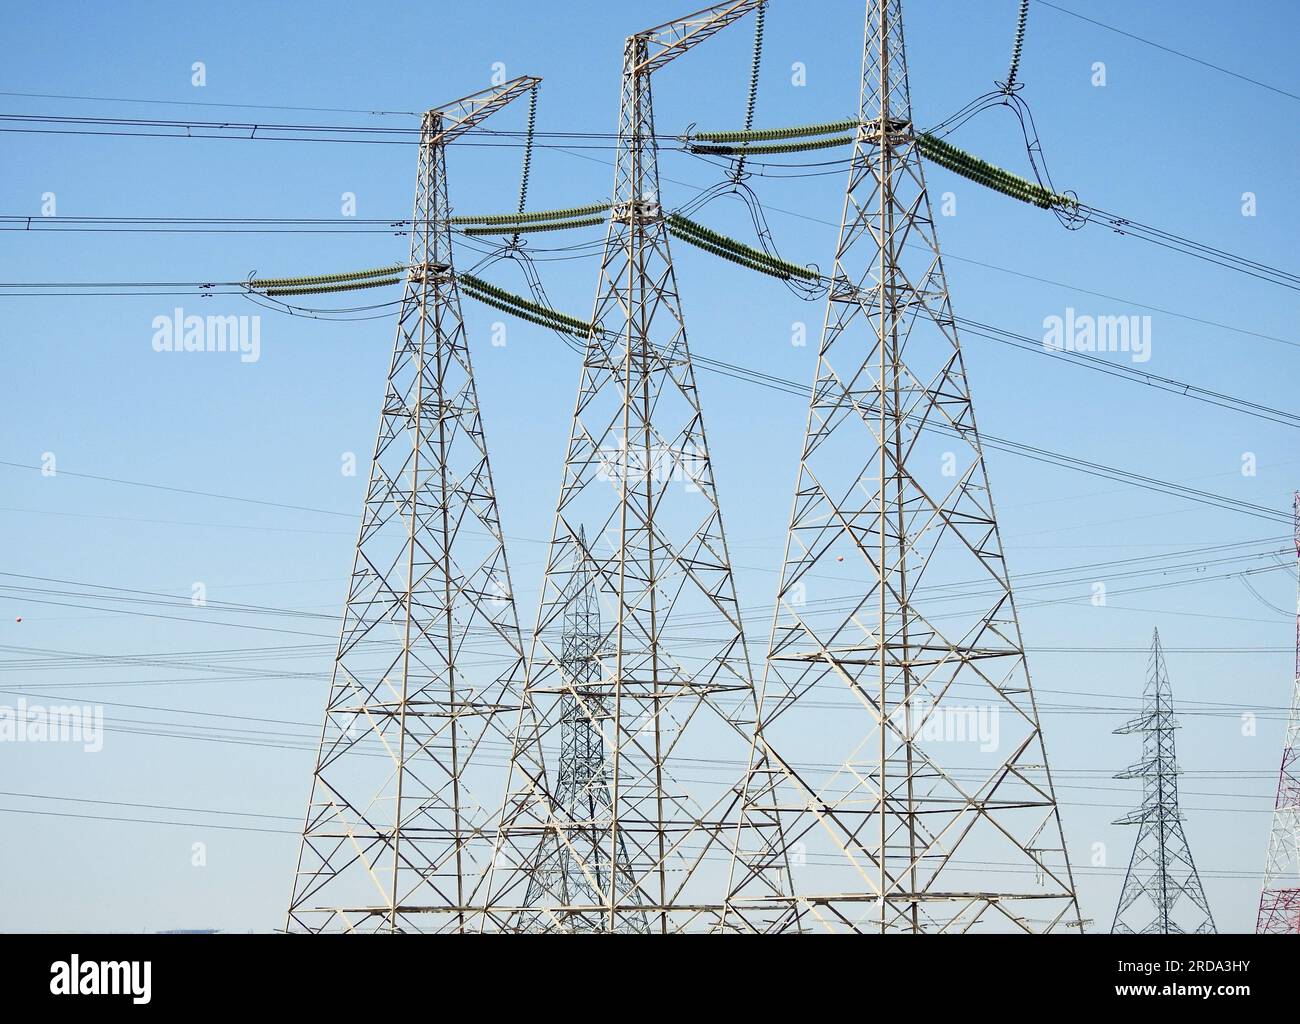 A transmission tower, electricity pylon which is a tall steel lattice structure that used to support overhead high voltage power lines, high voltage e Stock Photo